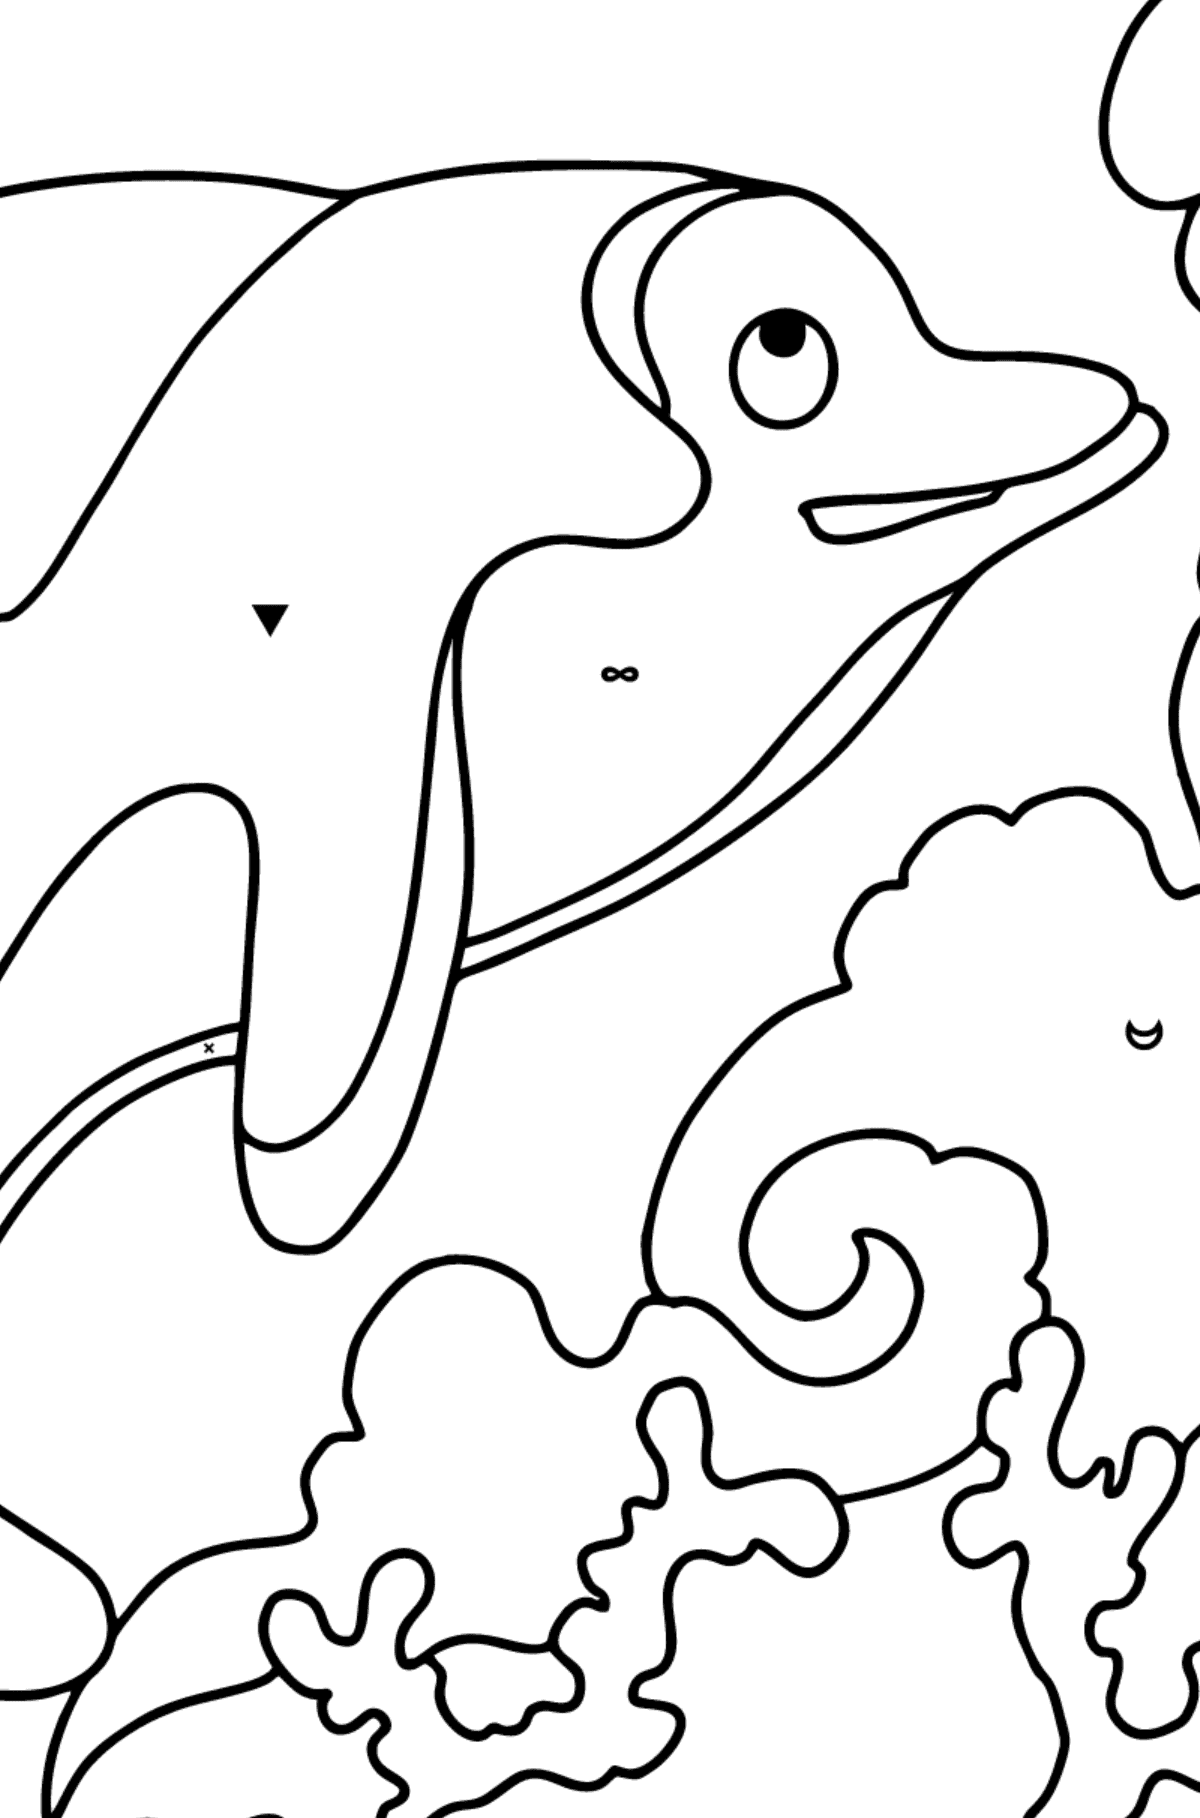 Coloring Page - A Dolphin, a Smart and Friendly Animal - Coloring by Symbols for Children